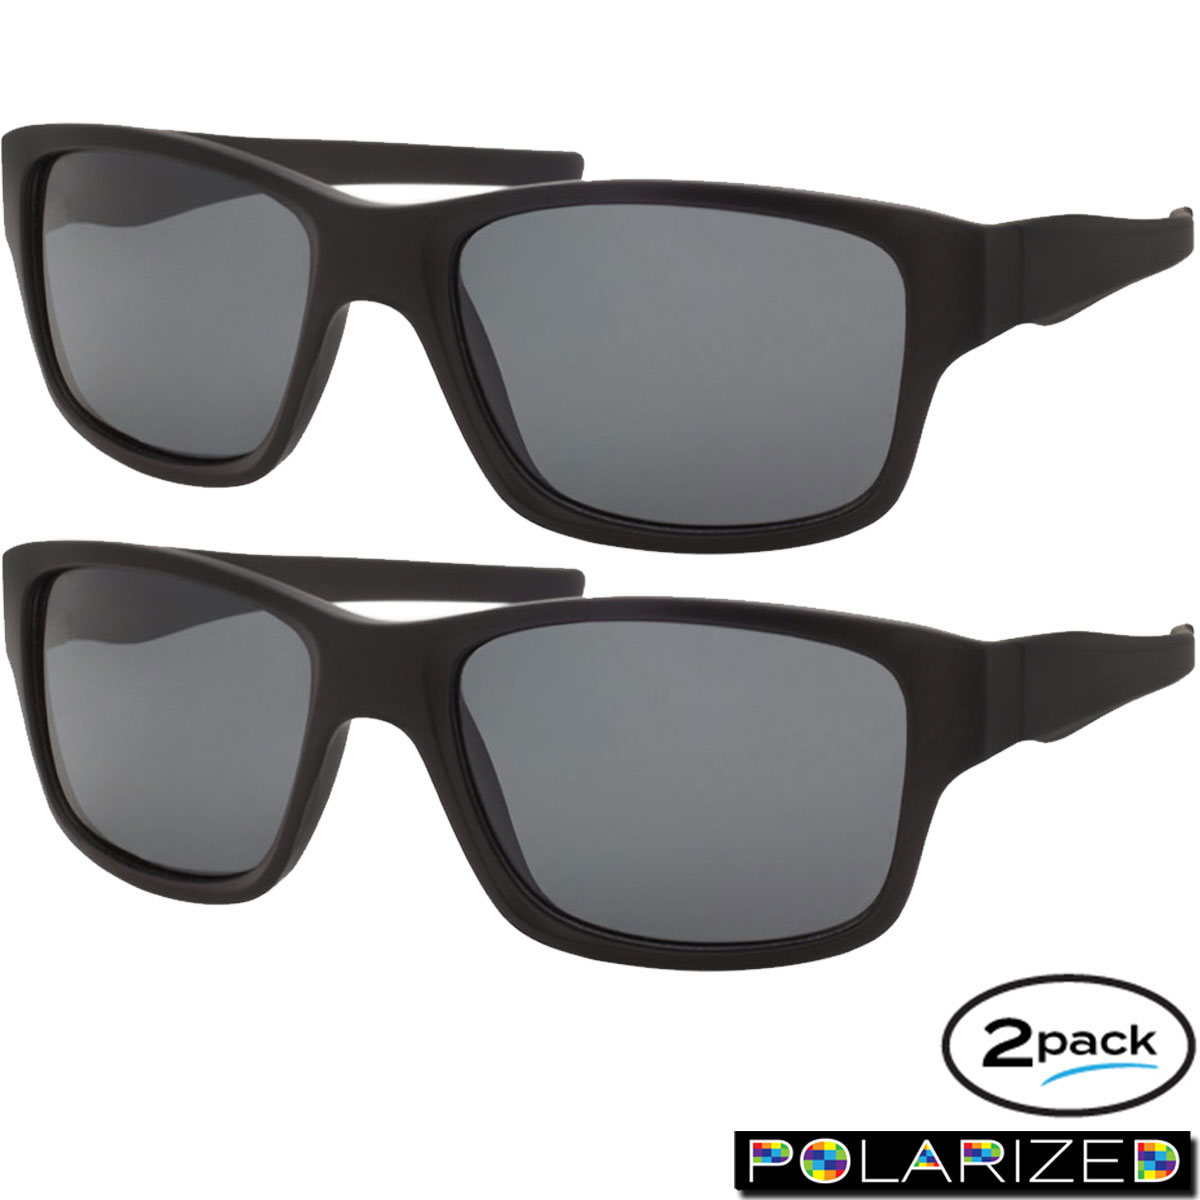 Mens Polarized Sunglasses 2 Pack All Black Sport Wrap Sunglass Style - image 2 of 5